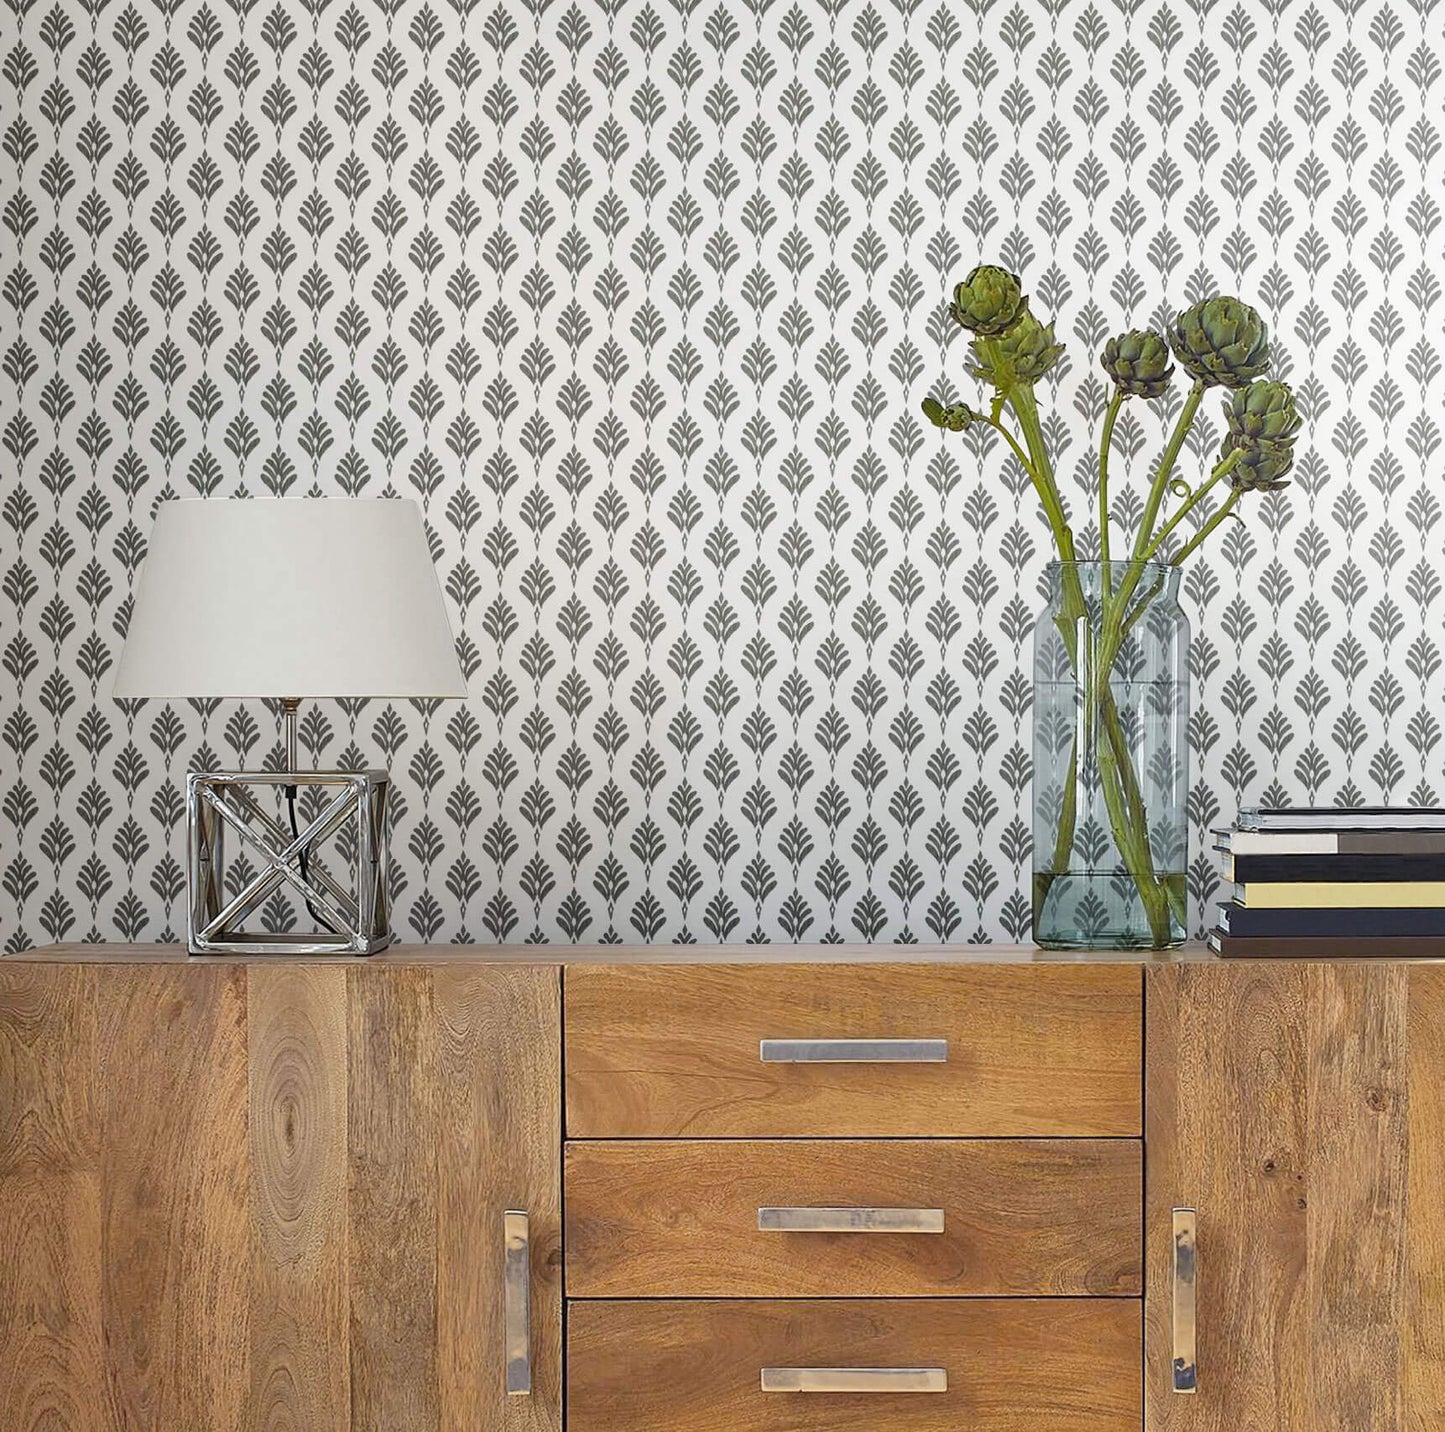 Waters Edge Resource Library French Scallop Wallpaper - Dark Gray